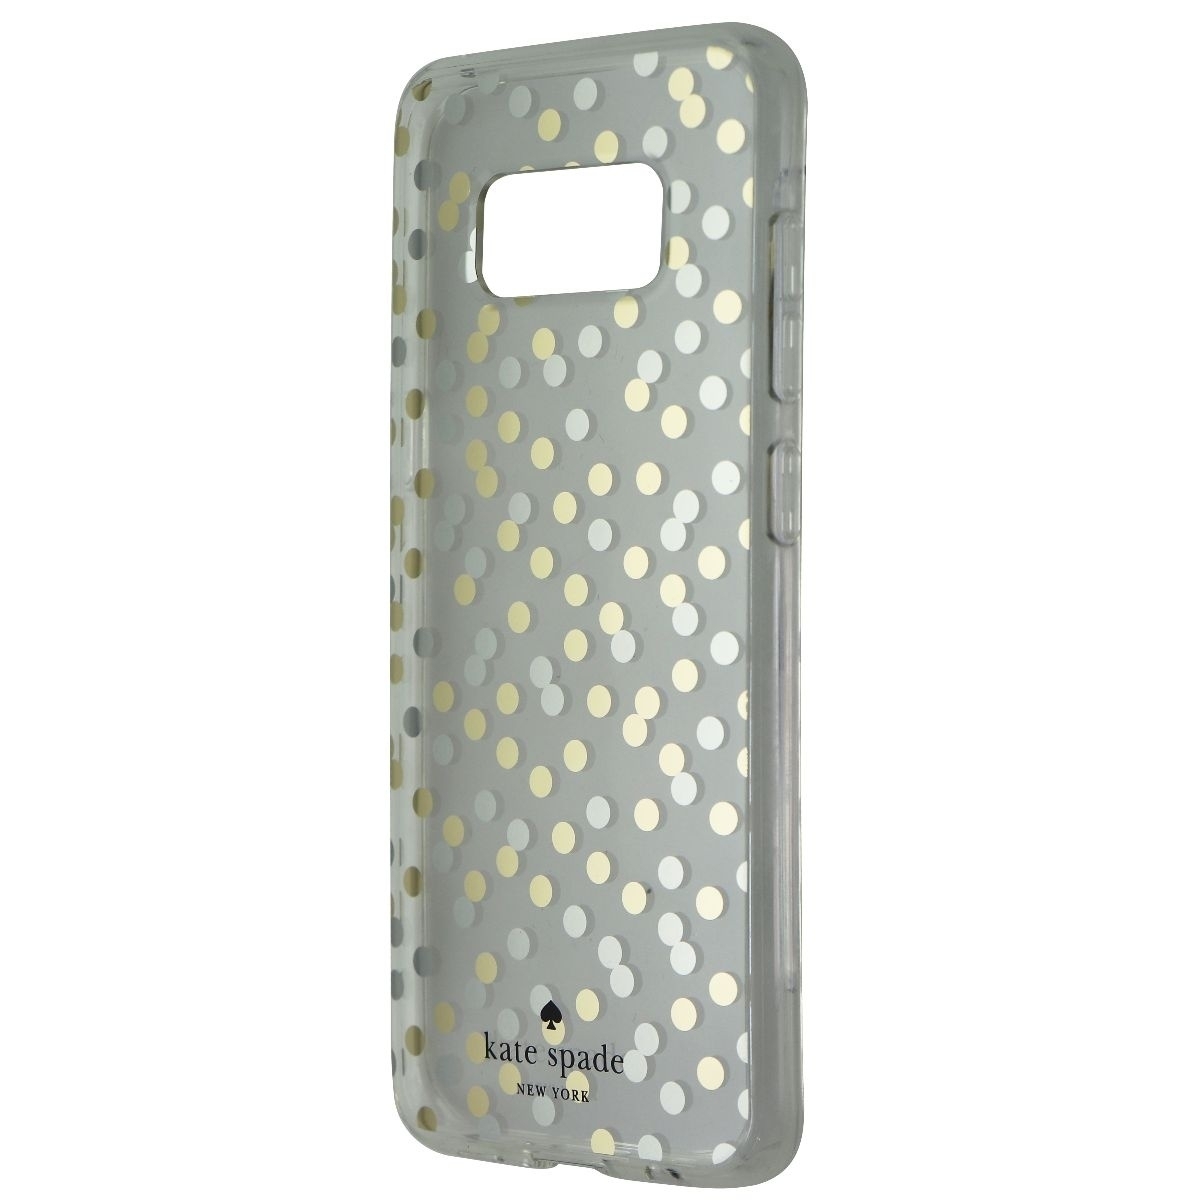 Kate Spade Hardshell Case For Galaxy S8 - Confetti Dot Clear/Gold/Silver